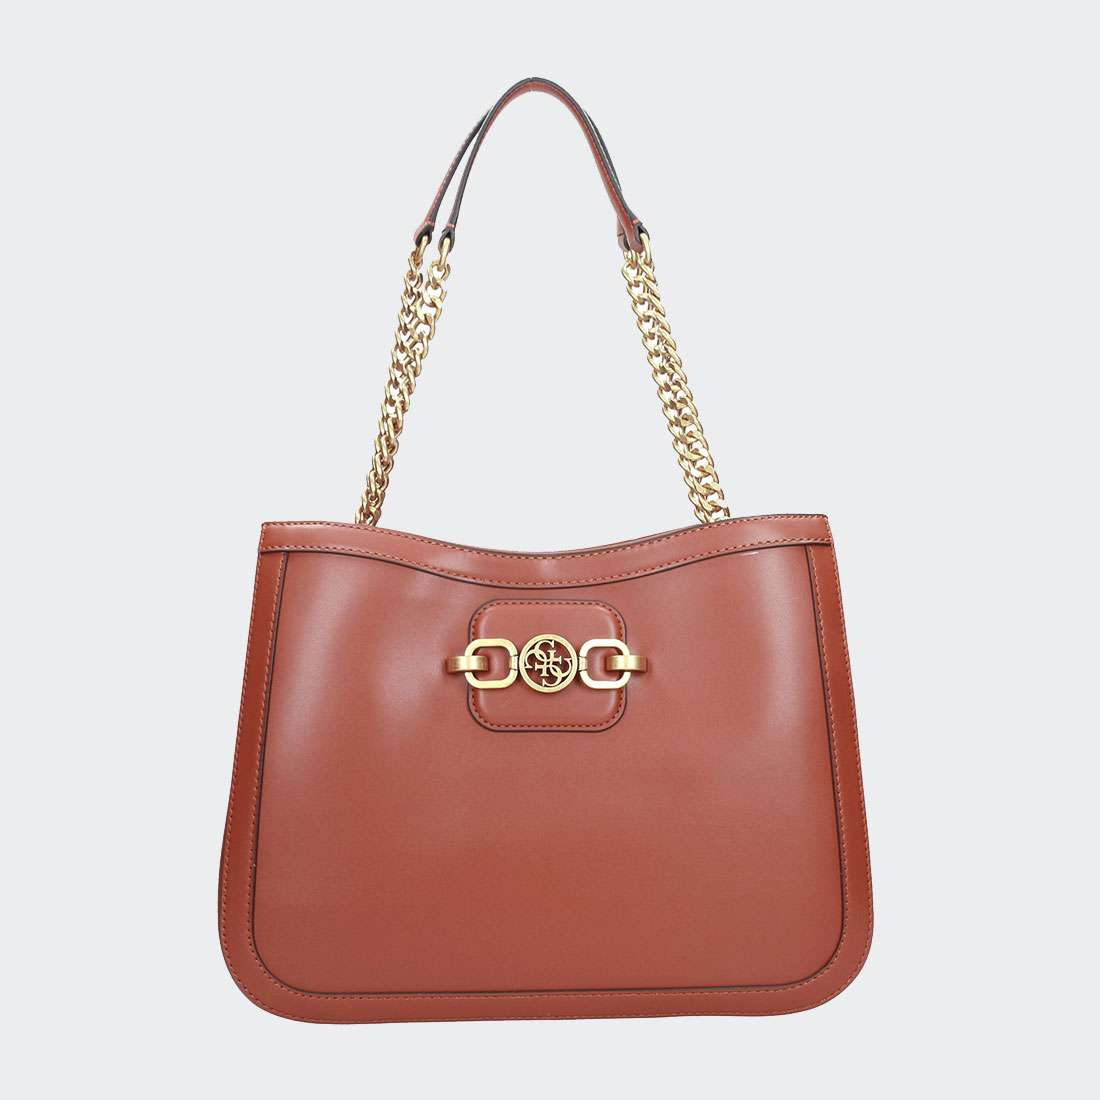 MALA GUESS HENSELY GIRLFRIEND TOTE